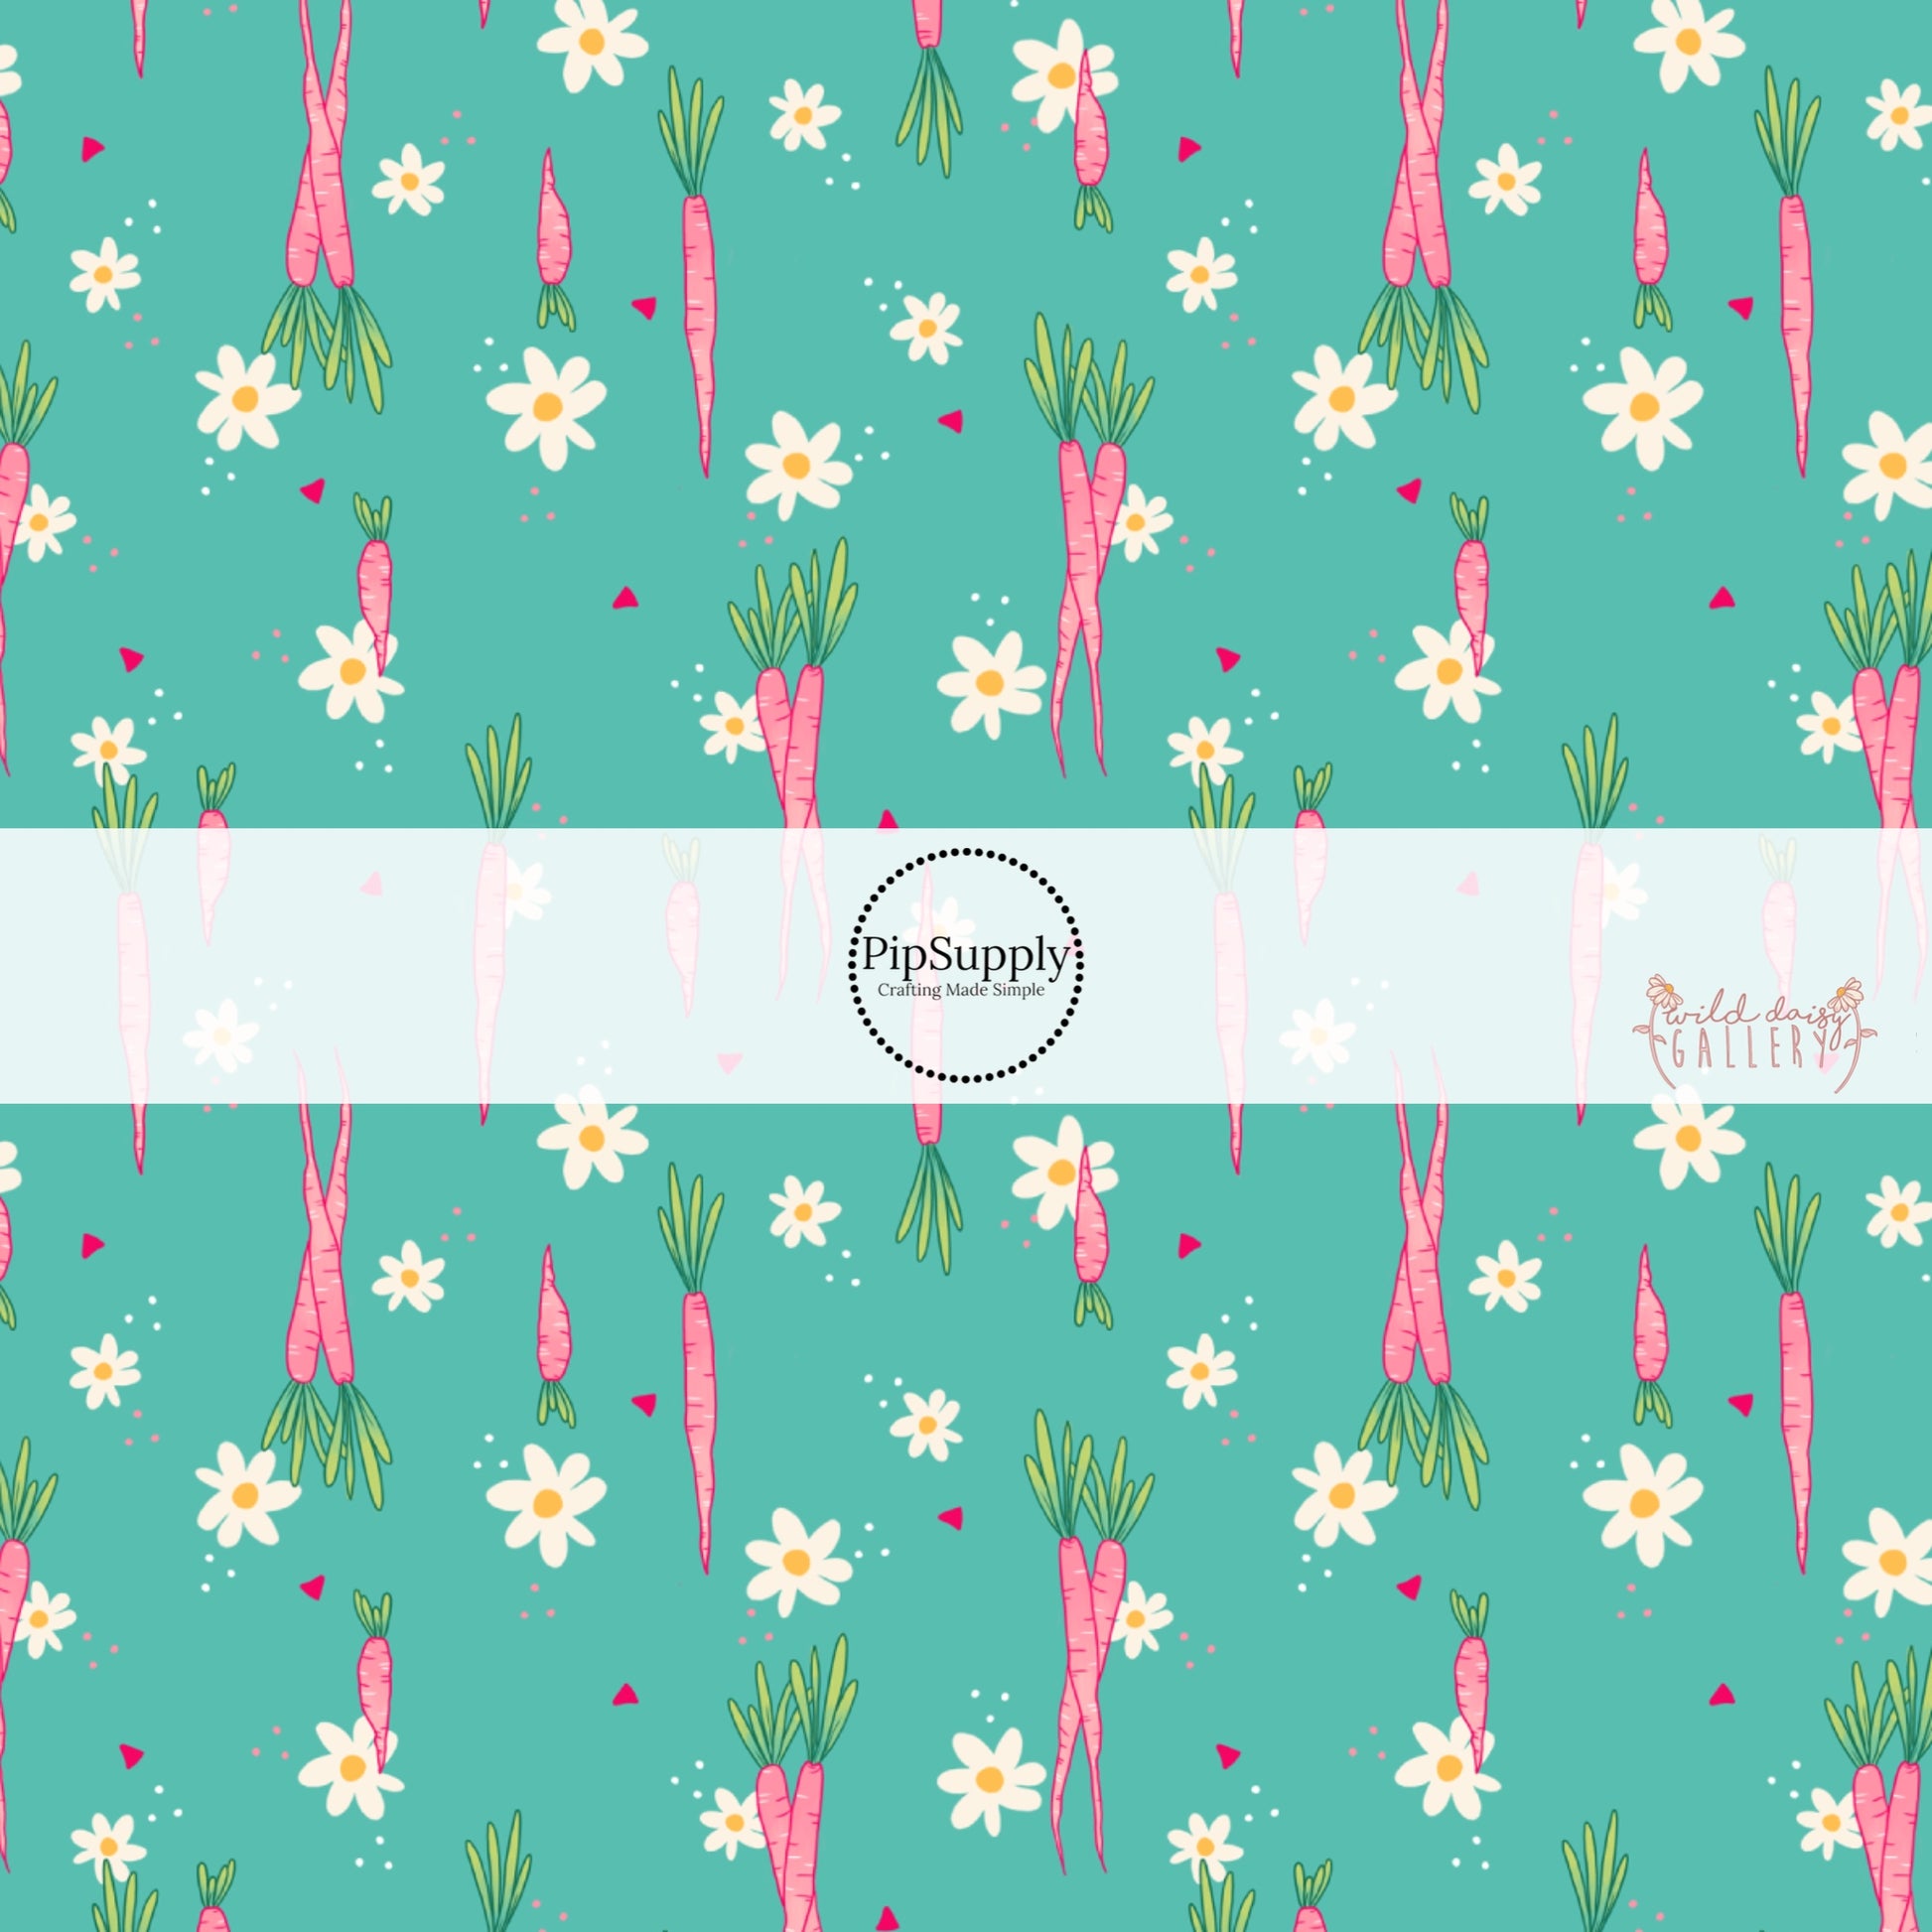 Aqua fabric by the yard with pink carrots and white daisies